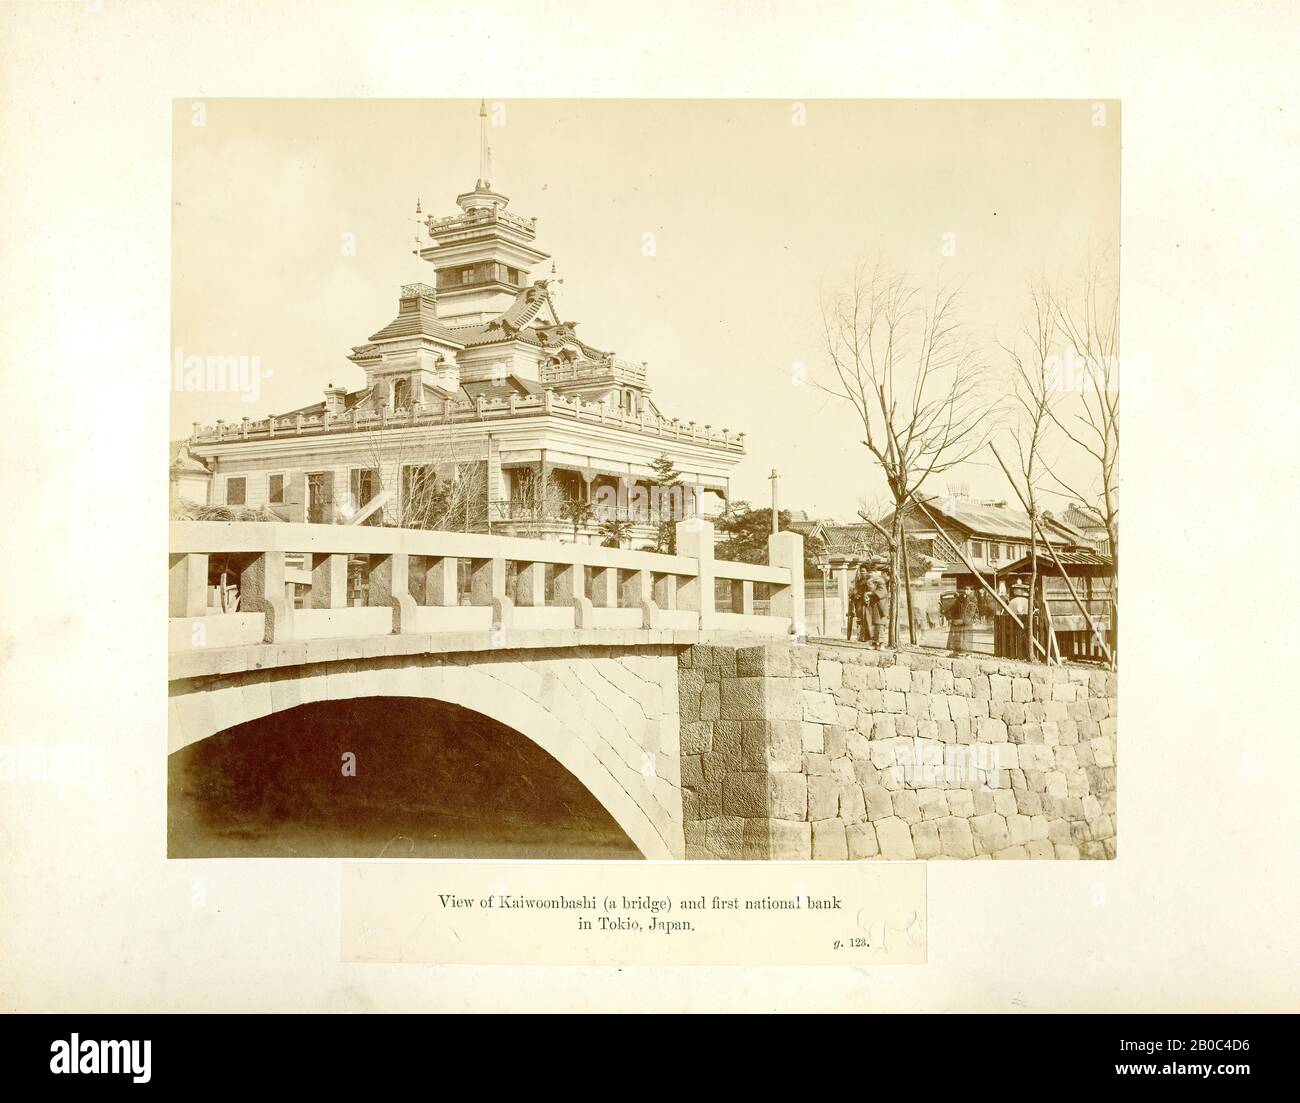 Unknown Artist, View of Kaiwoonbashi Bridge and First National Bank, Tokyo, Japan, after 1847, albumen print Stock Photo